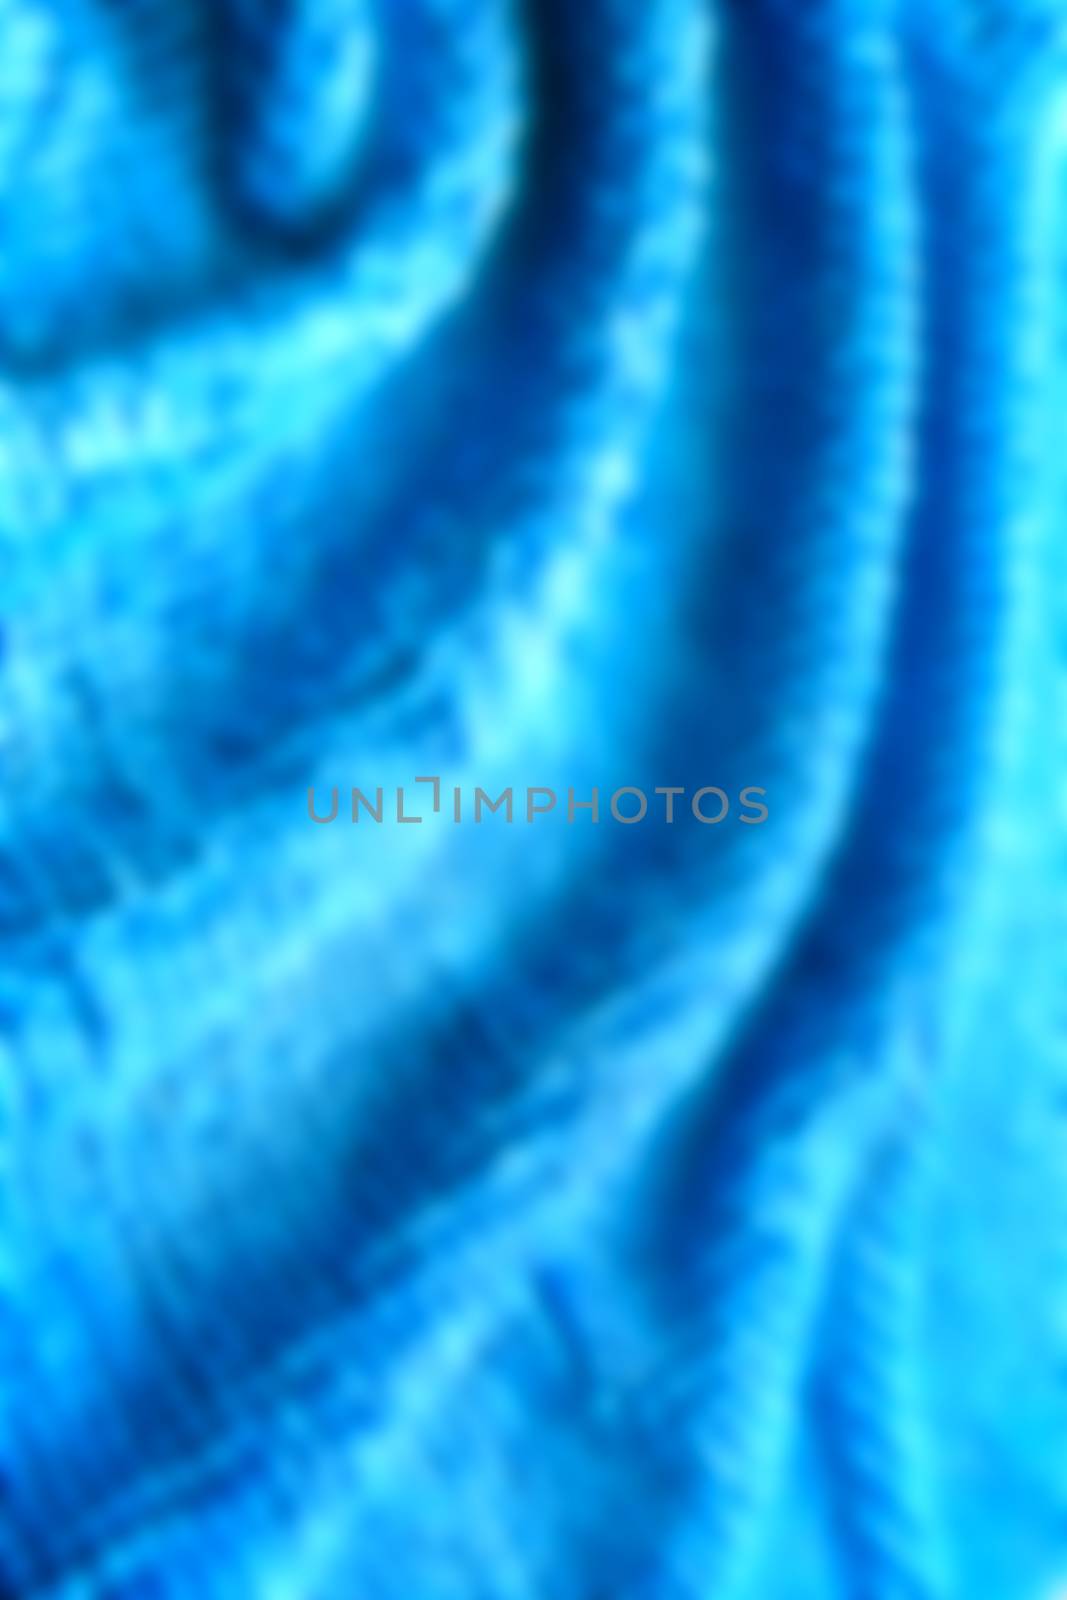 Abstract blue background made from bath mat